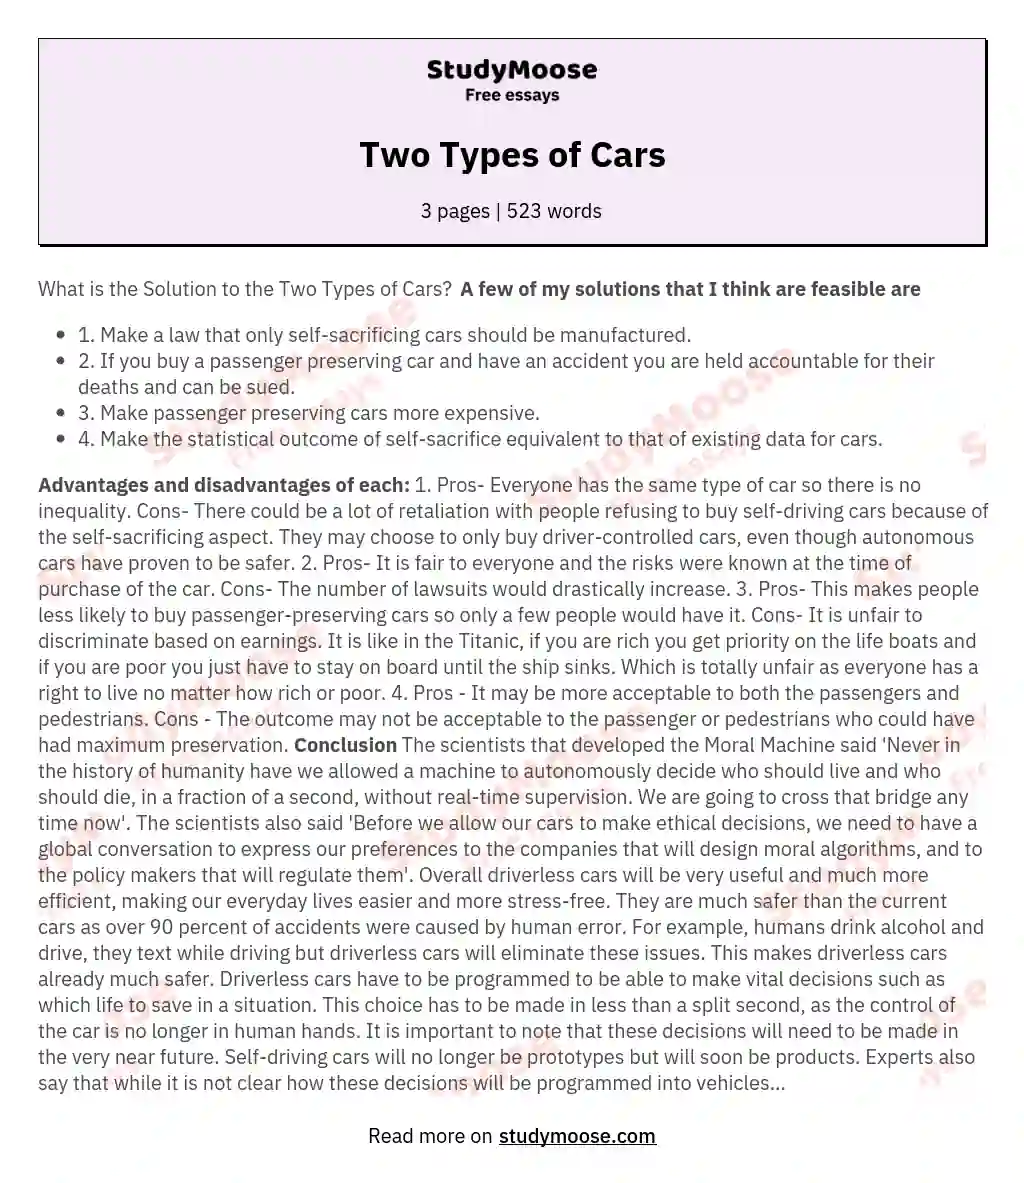 Two Types of Cars essay